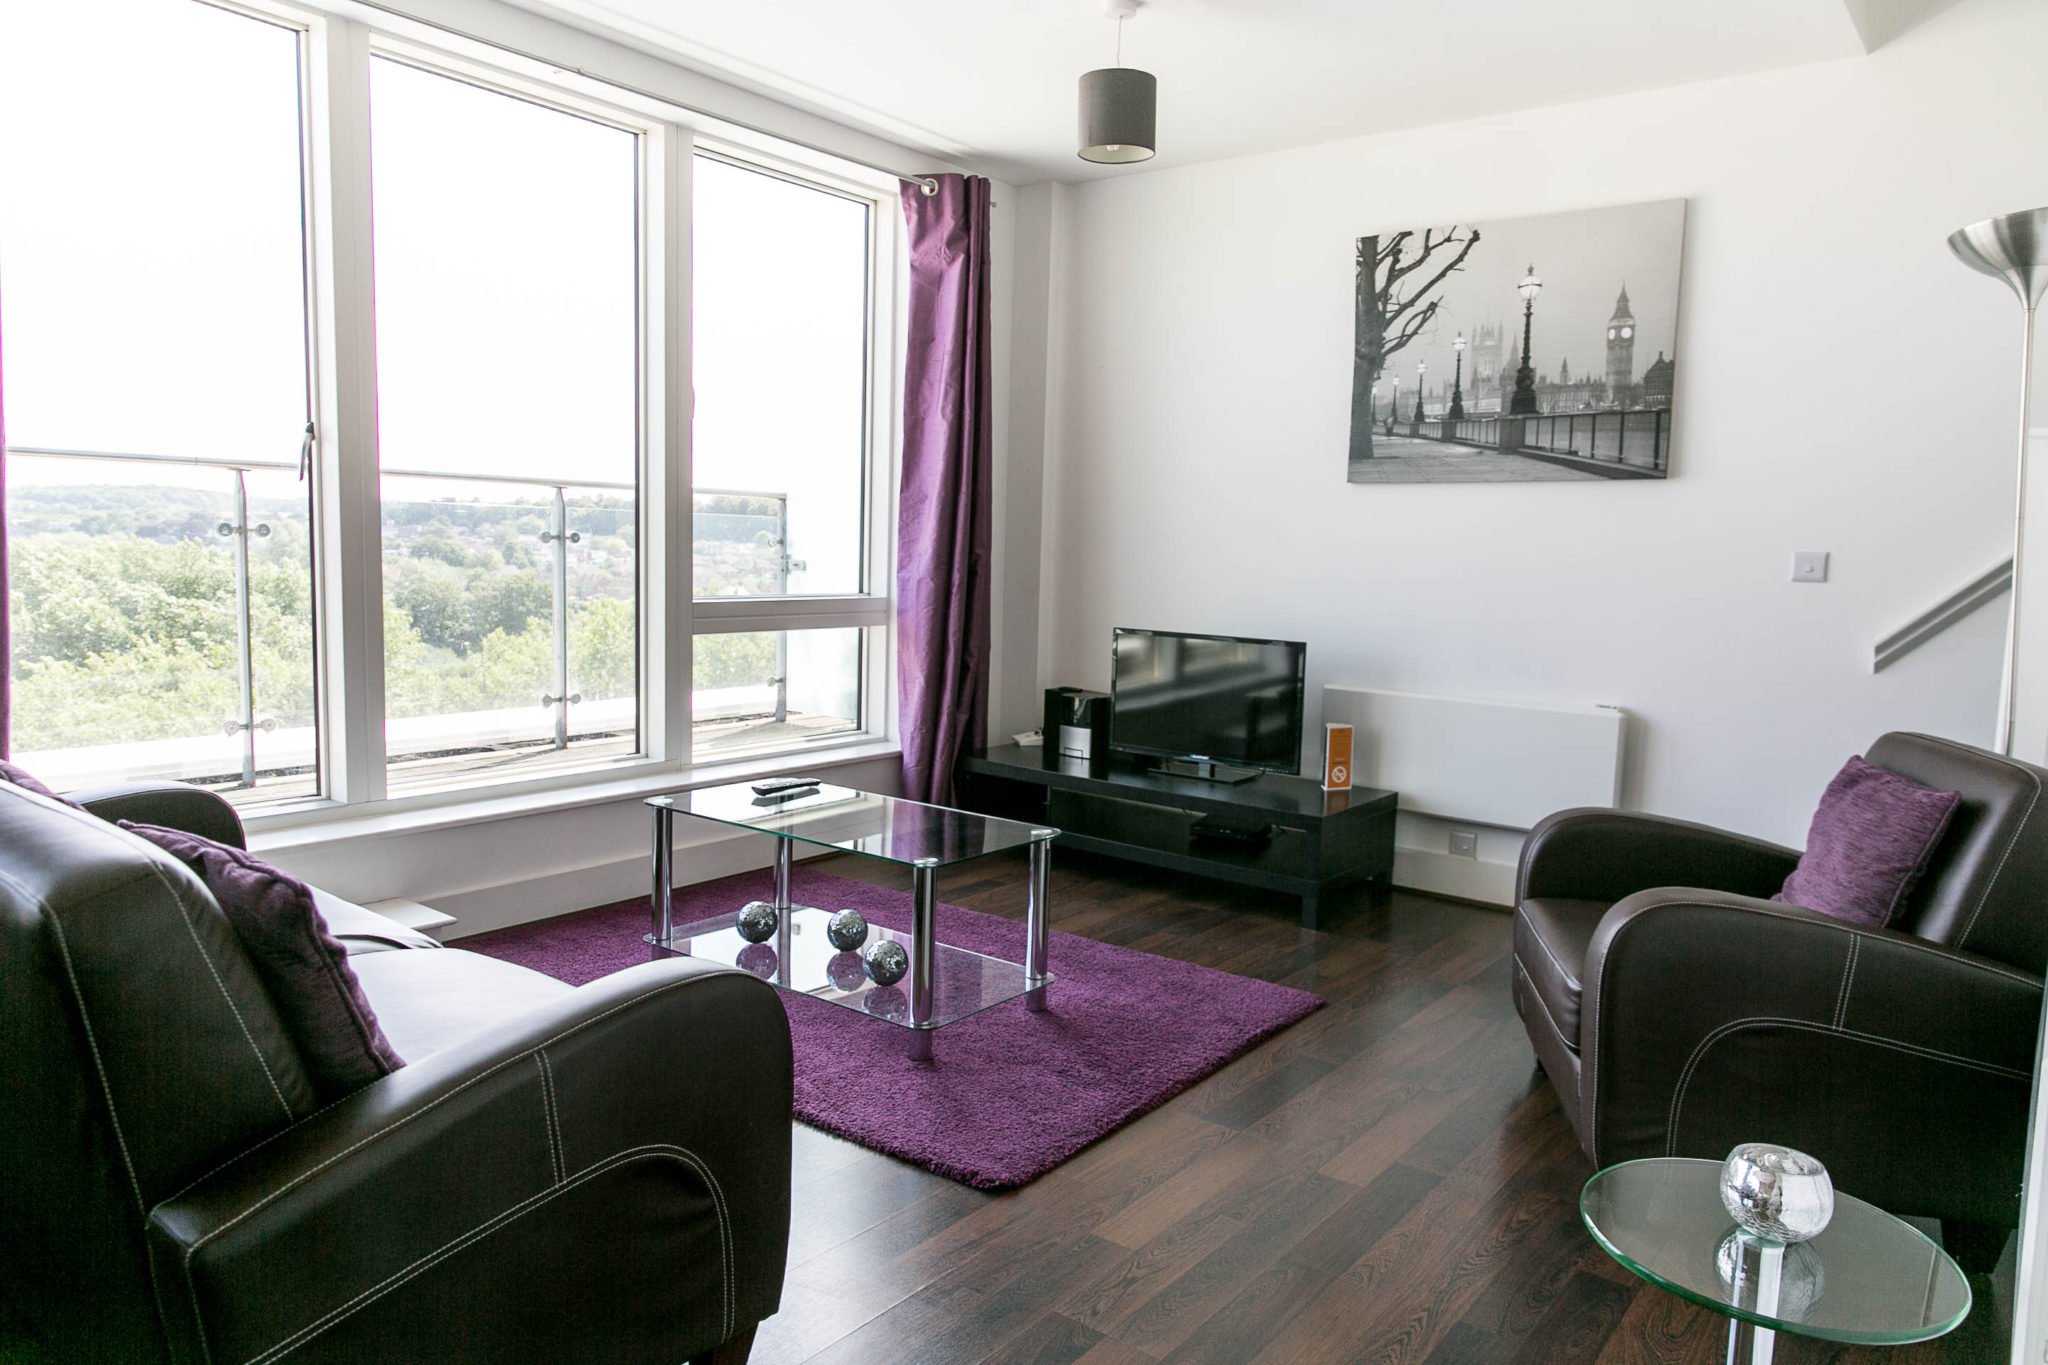 Serviced-Apartments-Basingstoke-UK-|-Serviced-Corporate-Accommodation-Hampshire-|-Short-Lets-Basingstoke-|-Cheaper-than-Hotel-|BEST-RATES--NO-FEES--BOOK-NOW---Urban-Stay